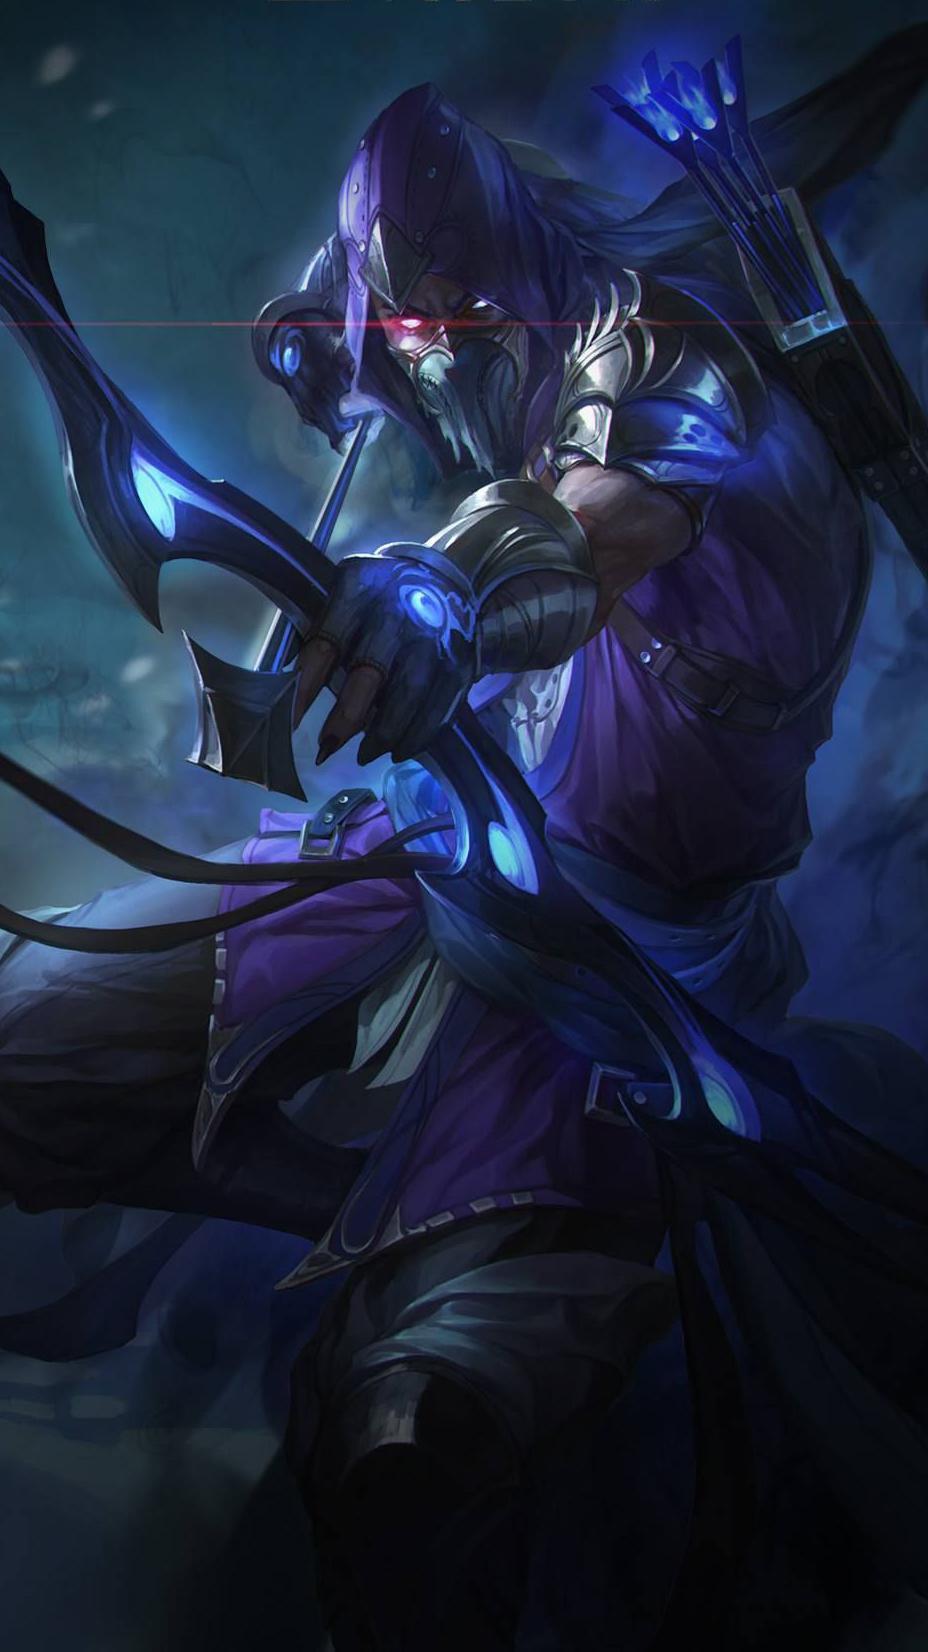 Free Skin Aov Wallpaper Hd Free For Android Apk Download